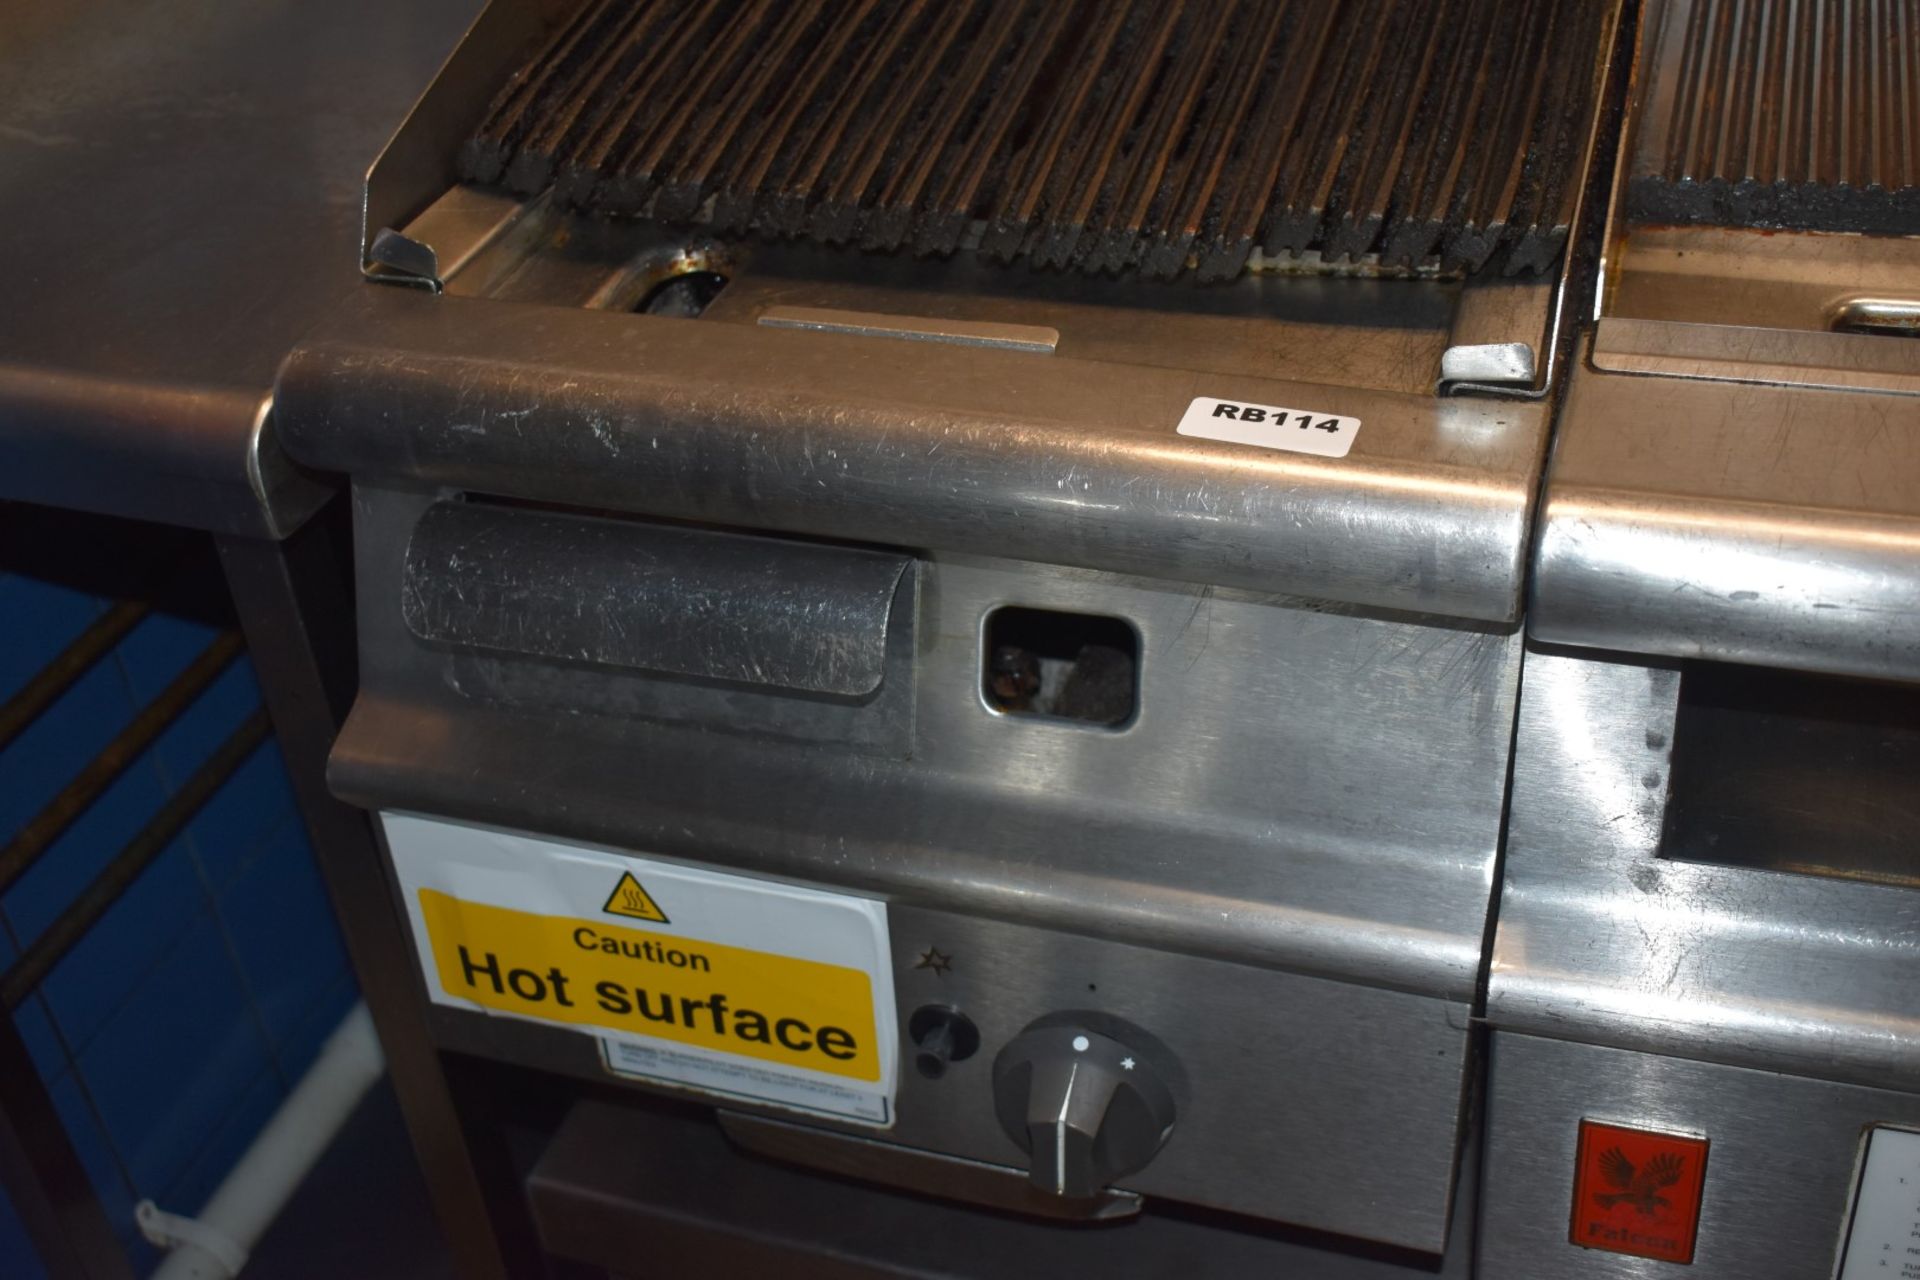 1 x Falcon Charcoal Gas Griddle - Size H41 x W40 x D78 cms - Ref: RB114 - CL558 - Location: - Image 3 of 4